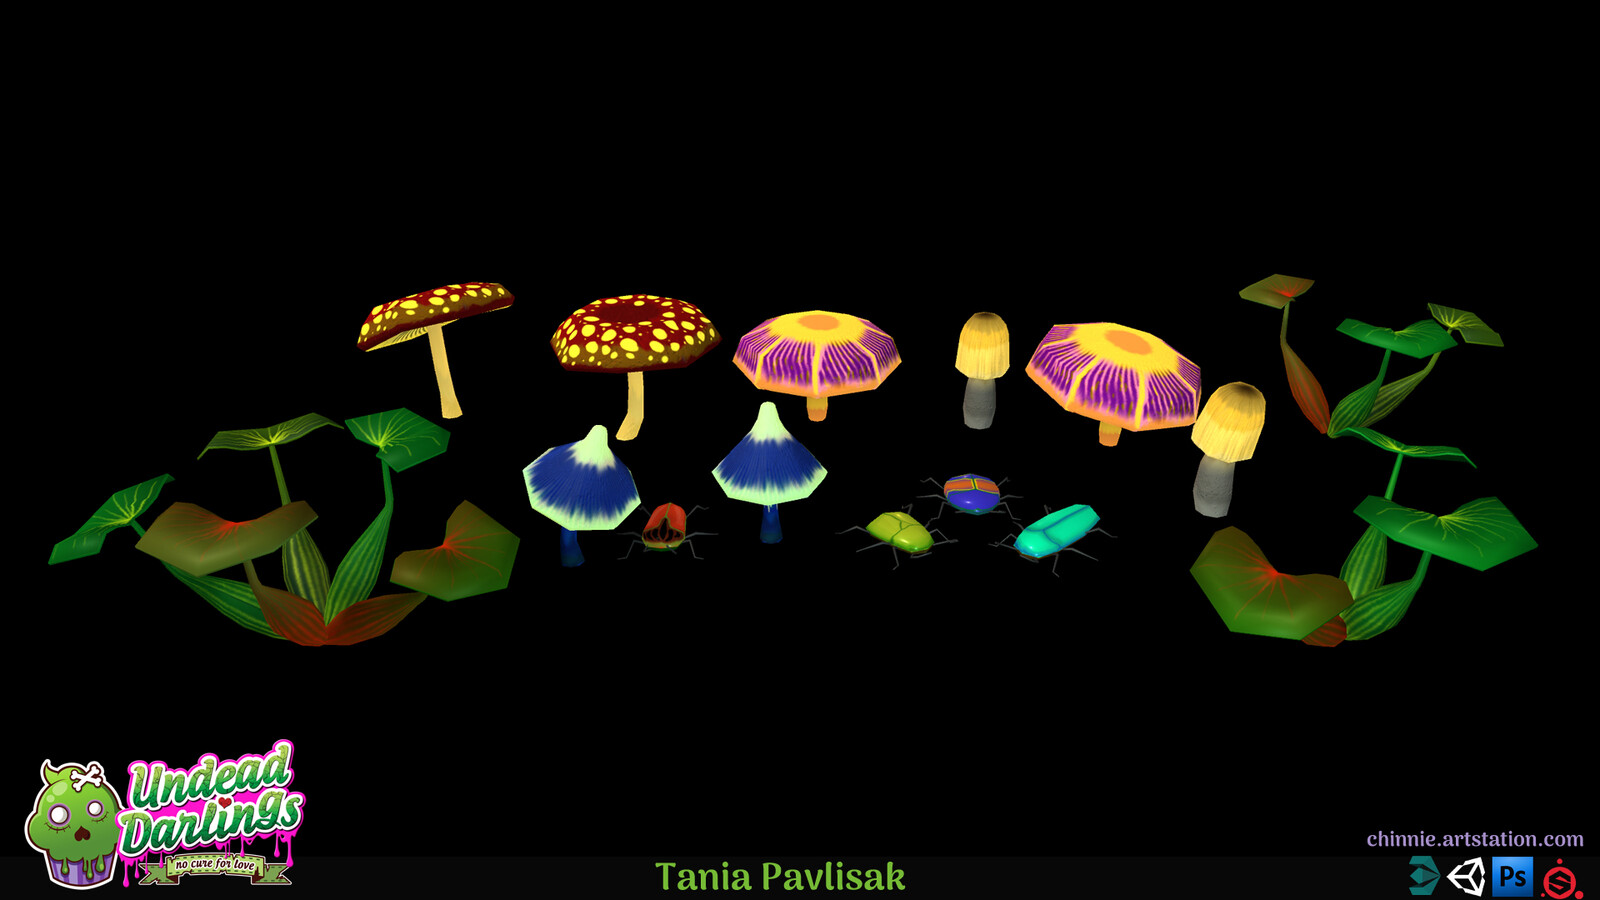 Sewer mushrooms, insects and plants